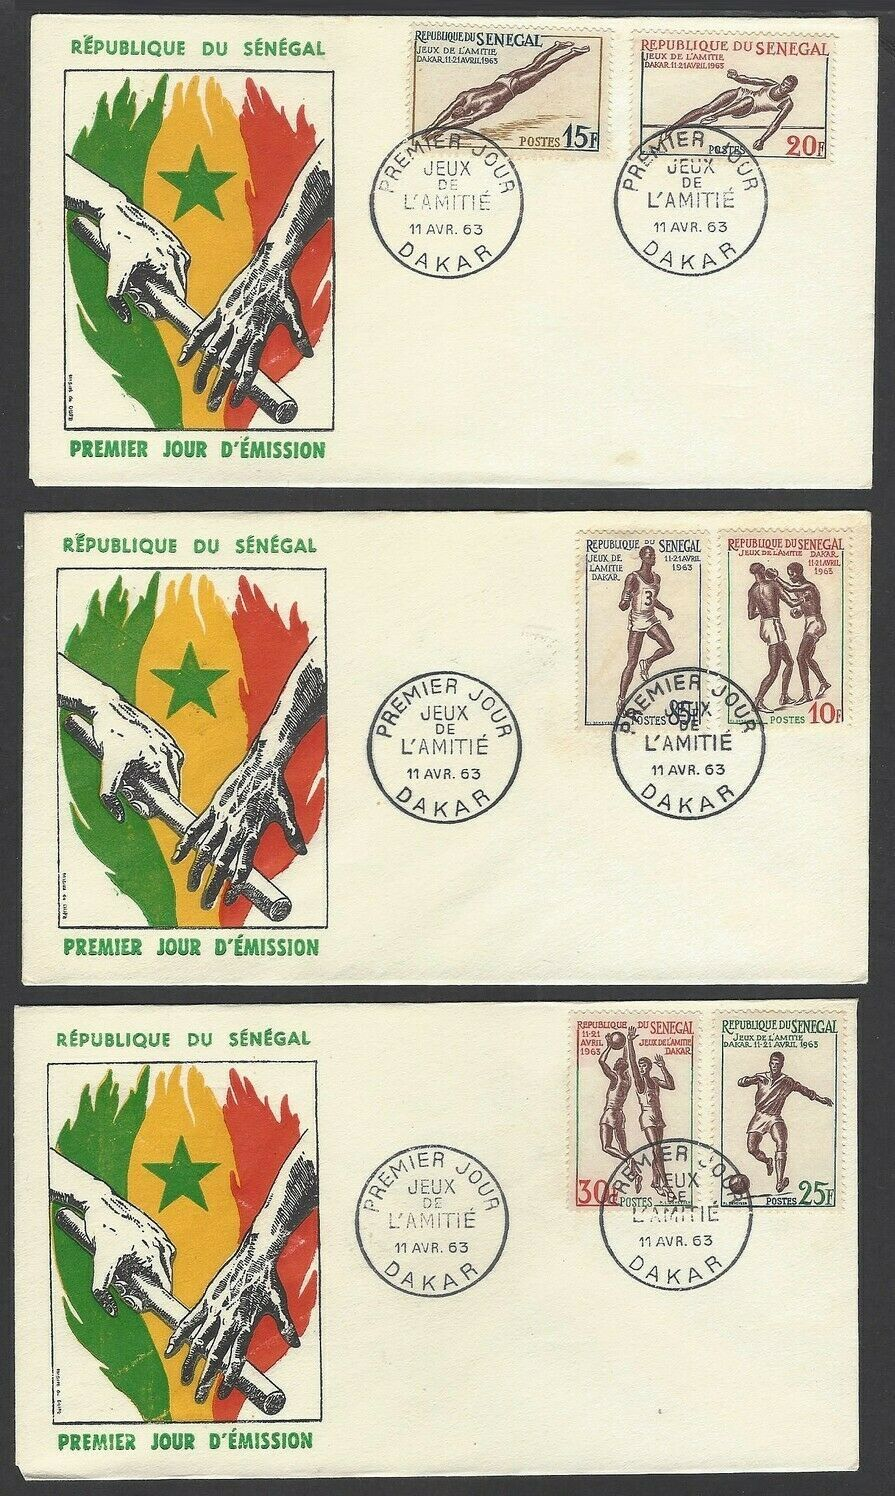 The second edition of the Friendship Games took place in Senegal's capital Dakar in 1961 ©ebay 